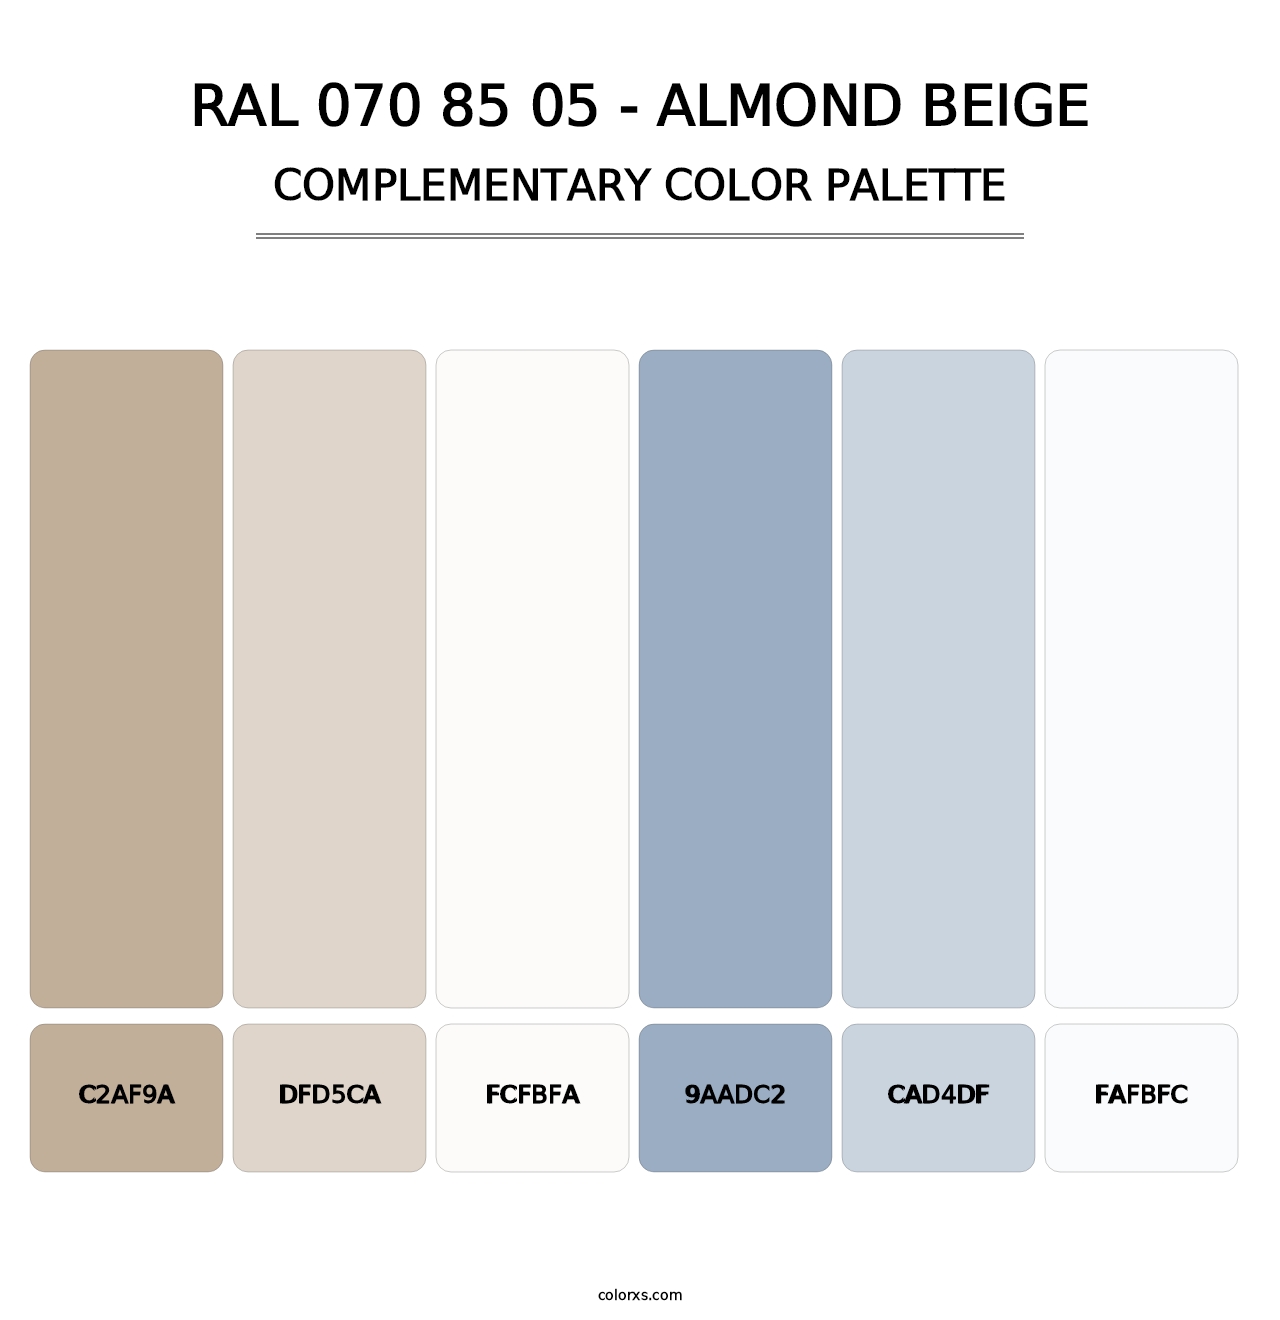 RAL 070 85 05 - Almond Beige - Complementary Color Palette